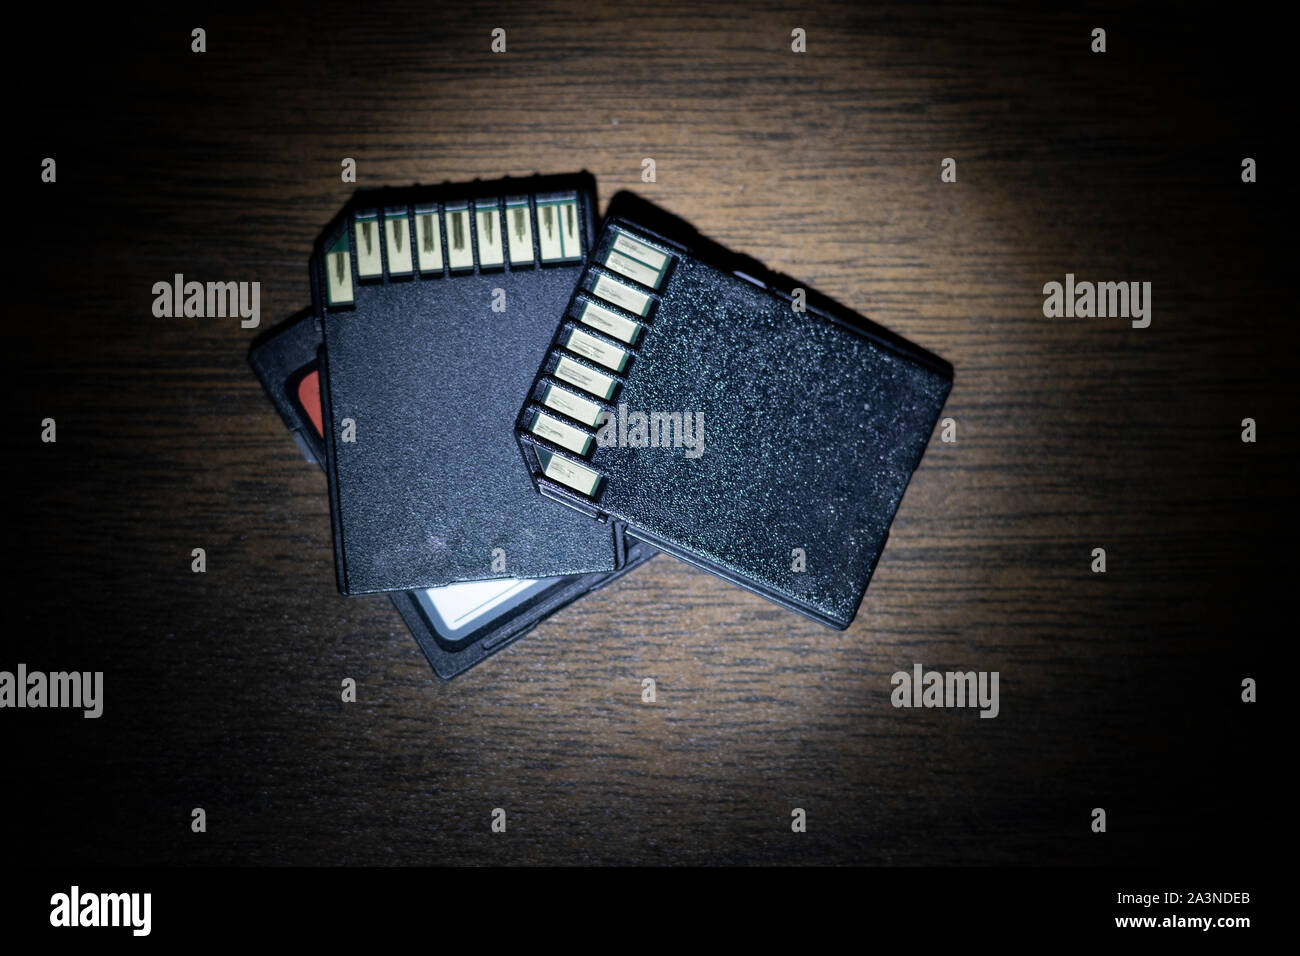 SD data cards on desktop, under round light as if discovered under flashlight investigation. Stock Photo